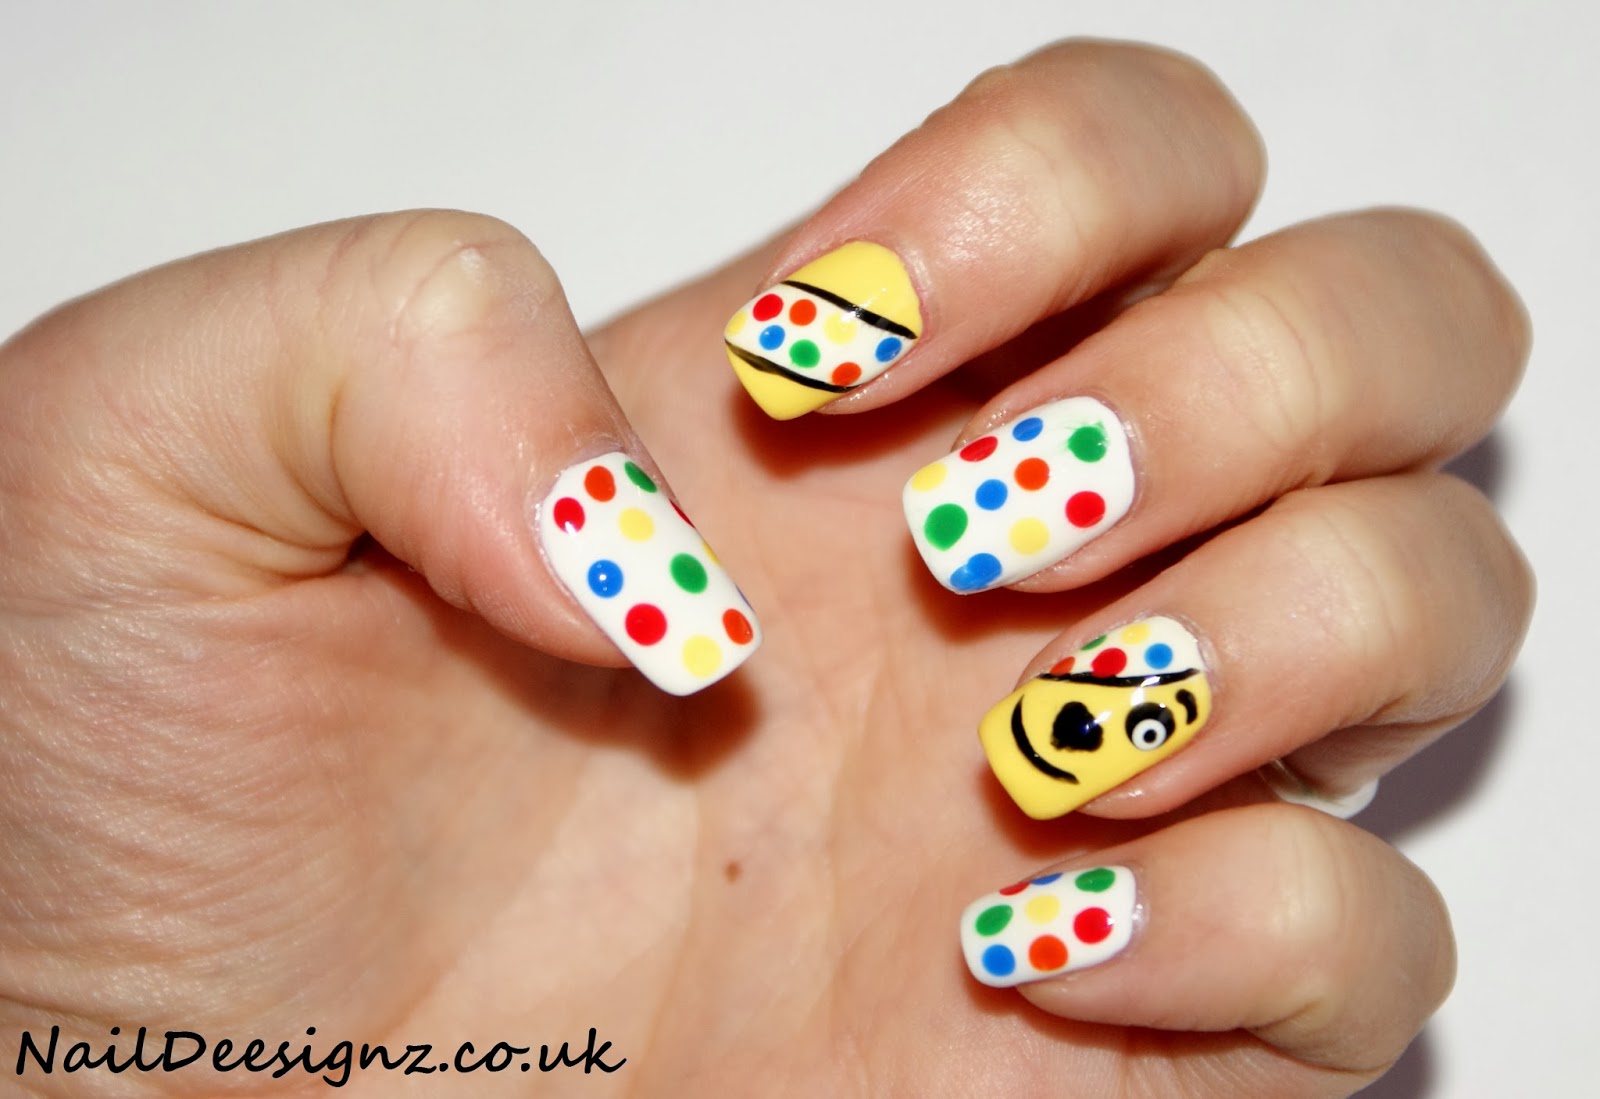 1. Easy Nail Art Designs for Kids - wide 9